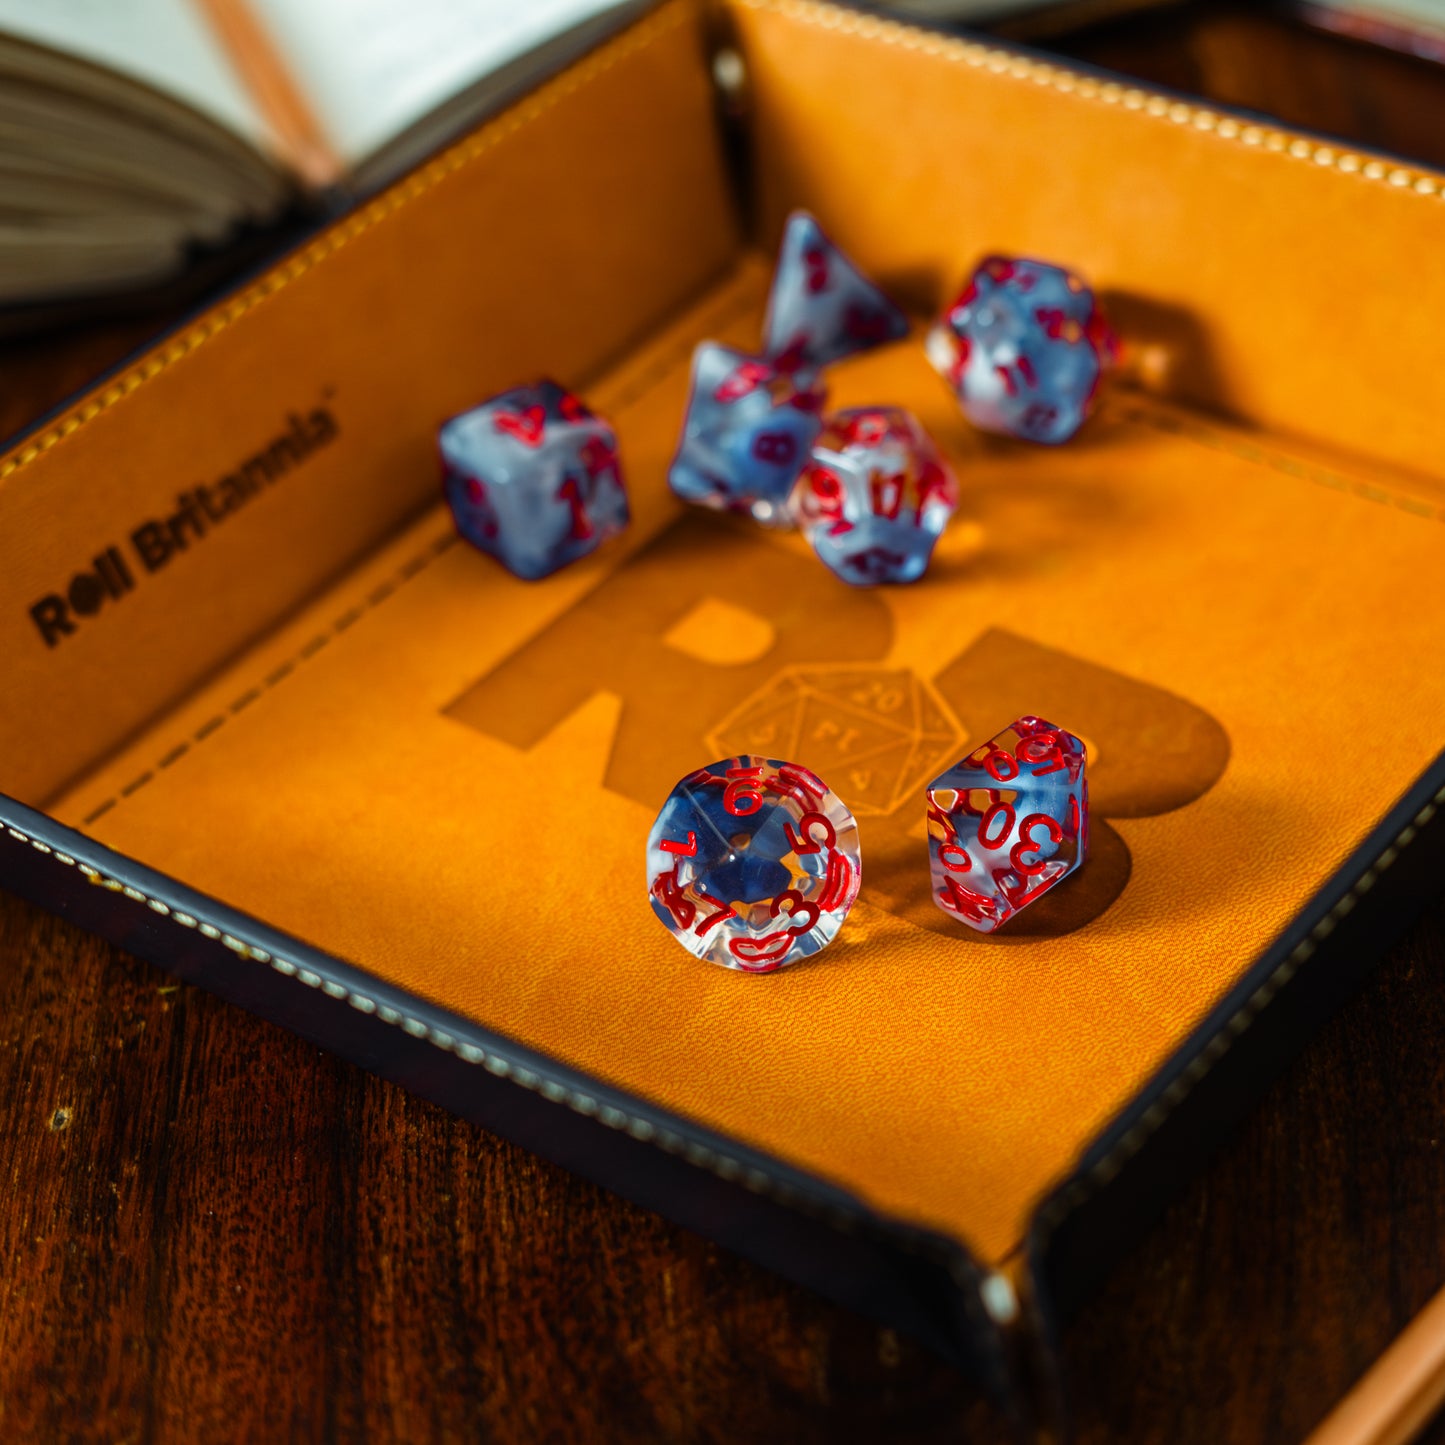 Roll Britannia Acrylic Dungeons and Dragons Dice Set with Red and Blue Ocean Aesthetic in branded leather dice tray